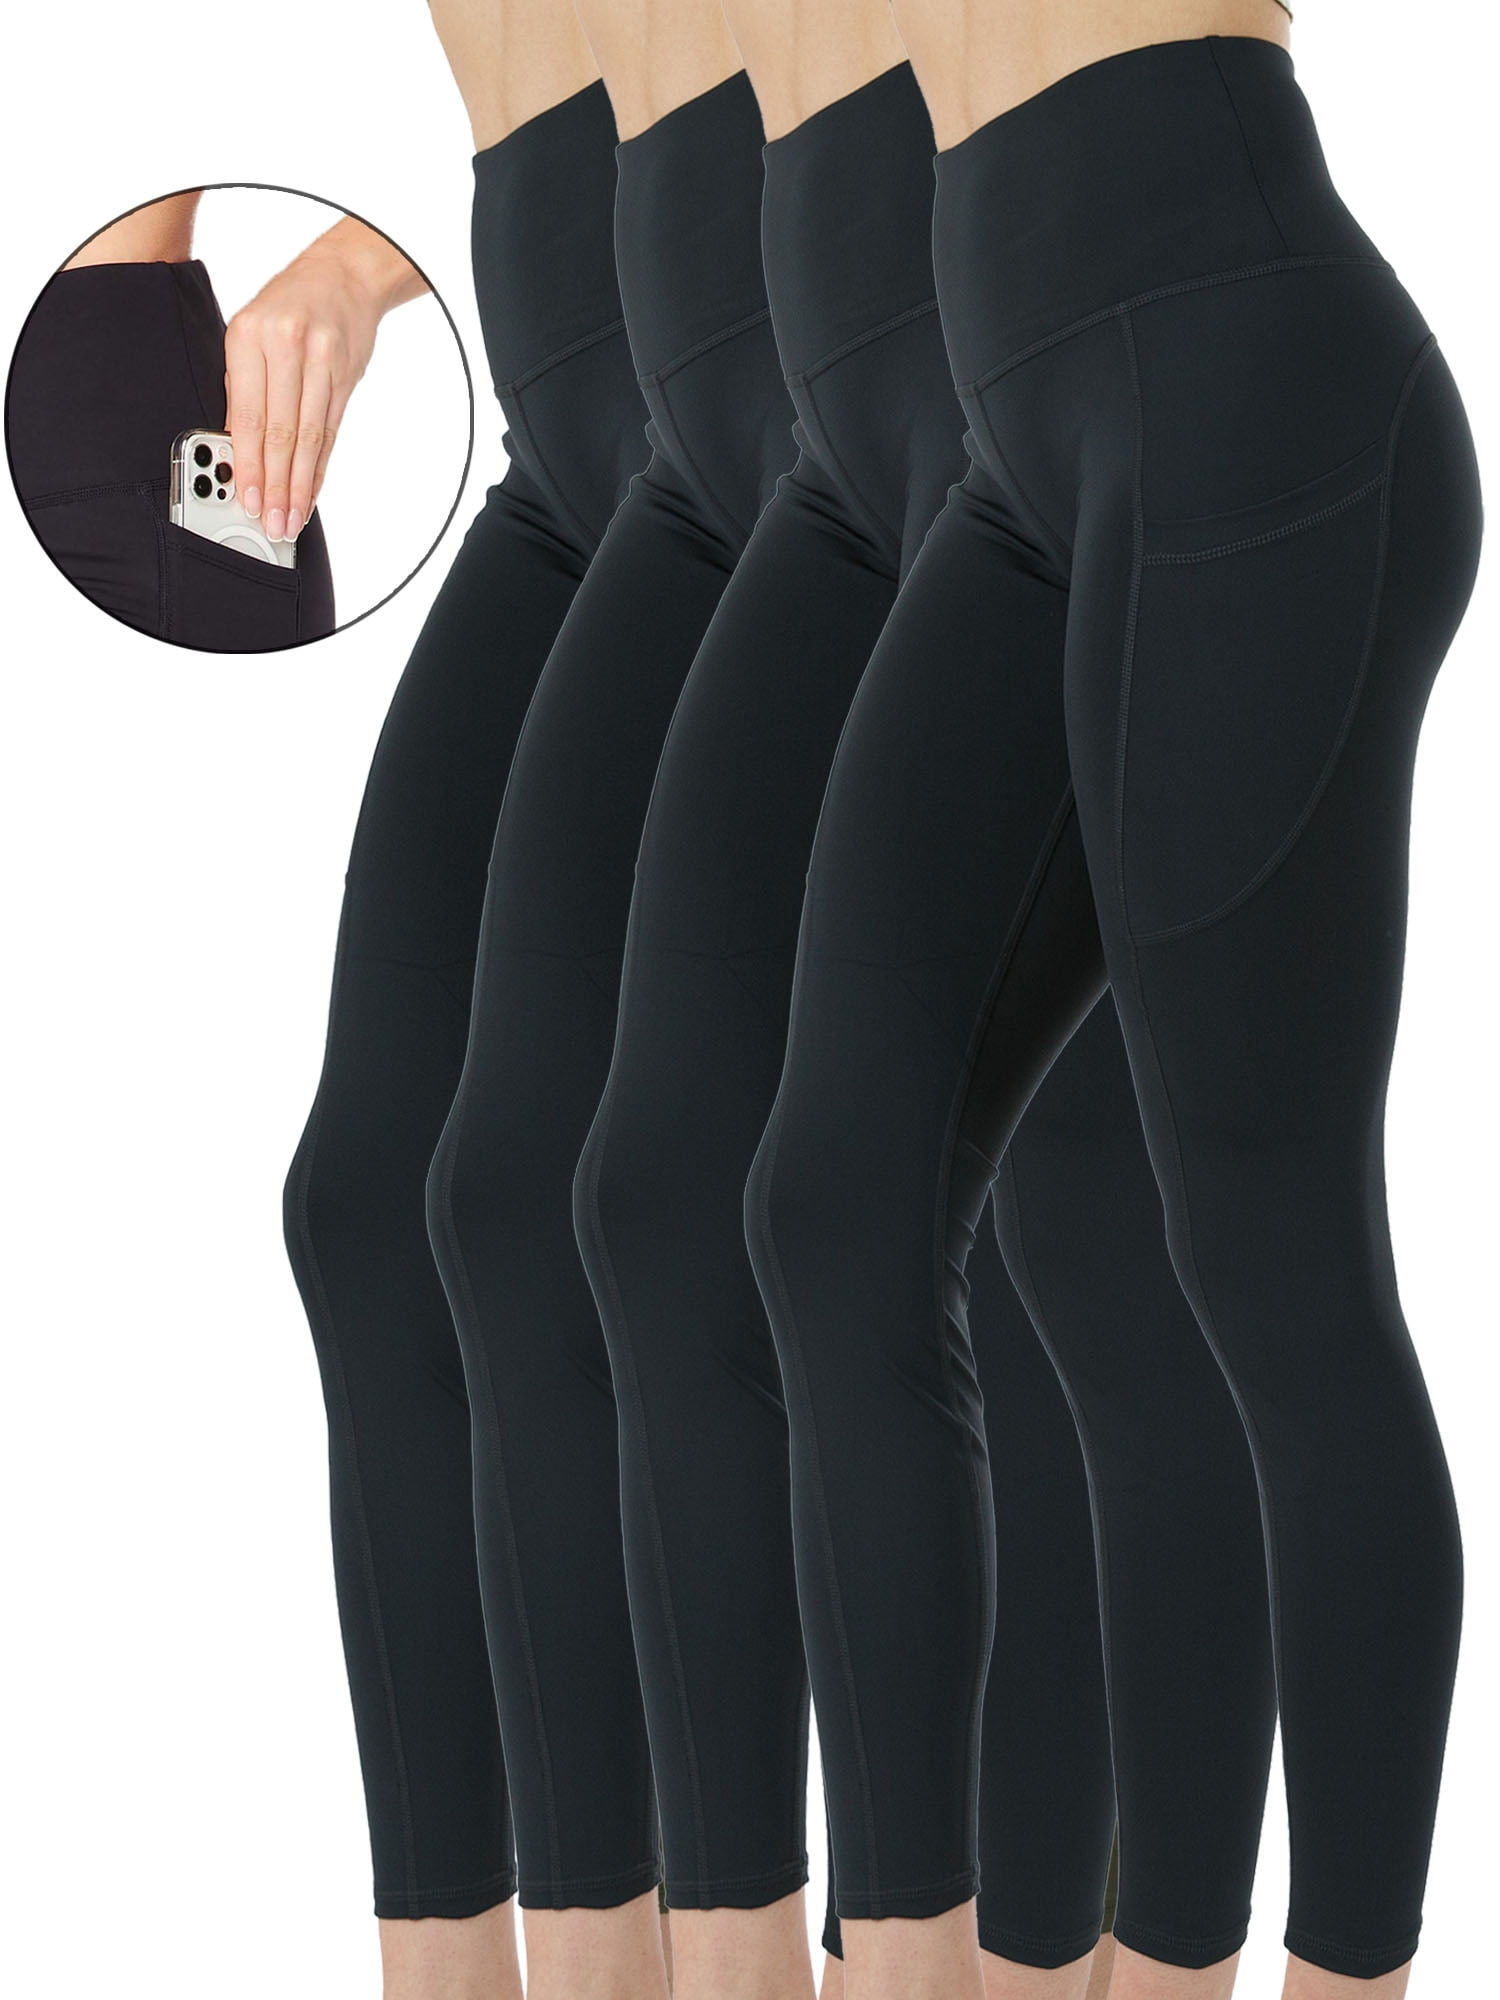 4-Pack Womens High-Waist Yoga Leggings with Two Side Pockets Sports Legging  Pants